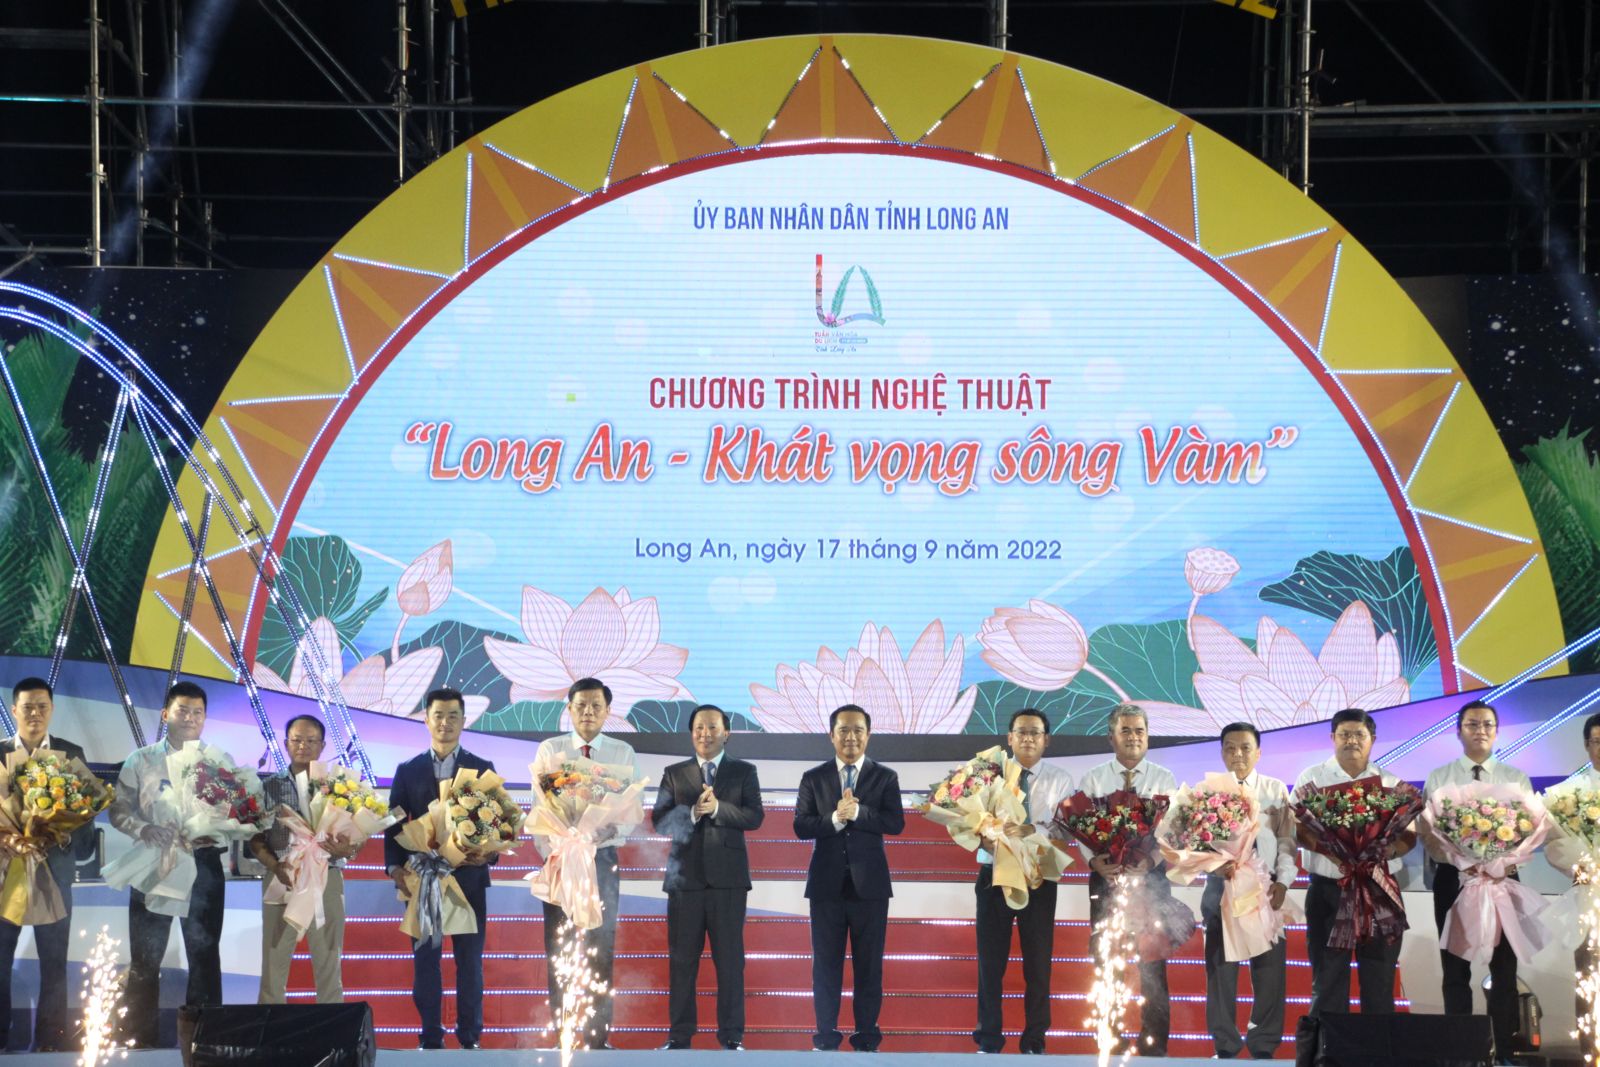 Member of the Party Central Committee, Secretary of the Provincial Party Committee, Chairman of the Provincial People's Council - Nguyen Van Duoc; Deputy Secretary of the Provincial Party Committee, Chairman of the Provincial People's Committee - Nguyen Van Ut present flowers to donors in the opening ceremony